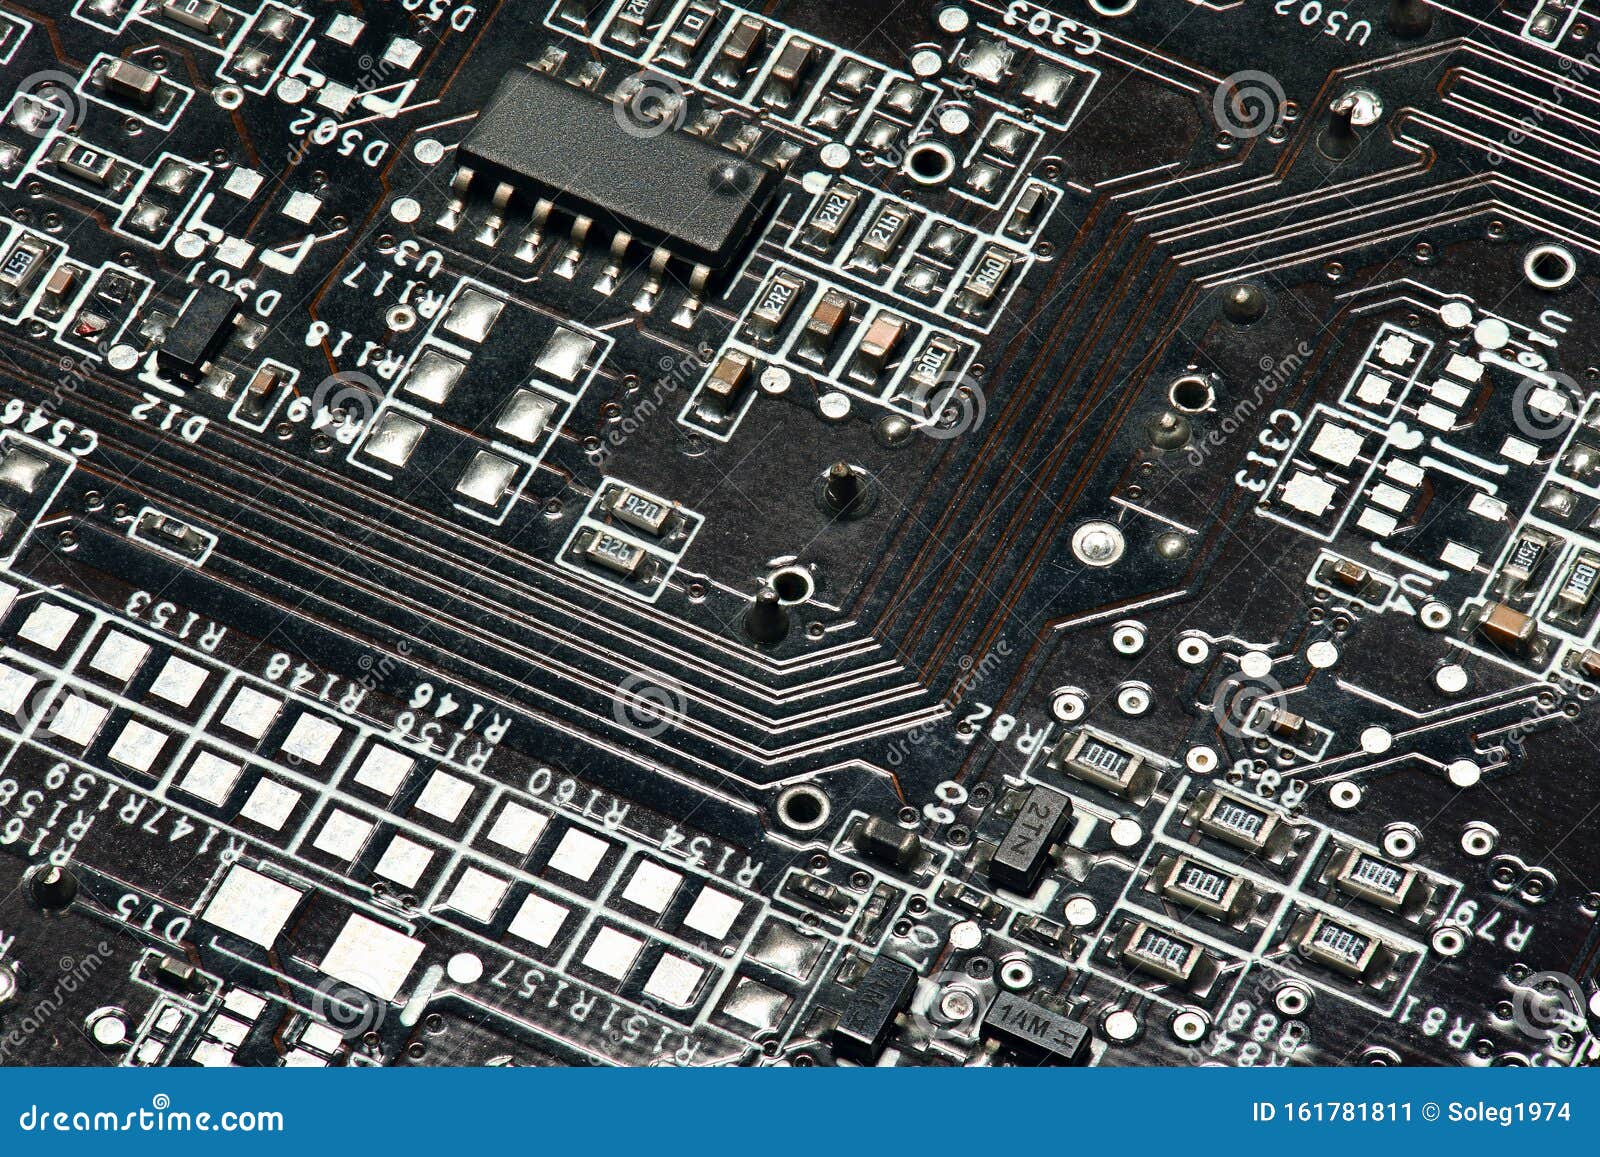 Printed Circuit Board and Microchip, or Cpu Closeup - Electronic Component  for Digital Equipment, Concept for Development of Stock Image - Image of  computer, electric: 161781811